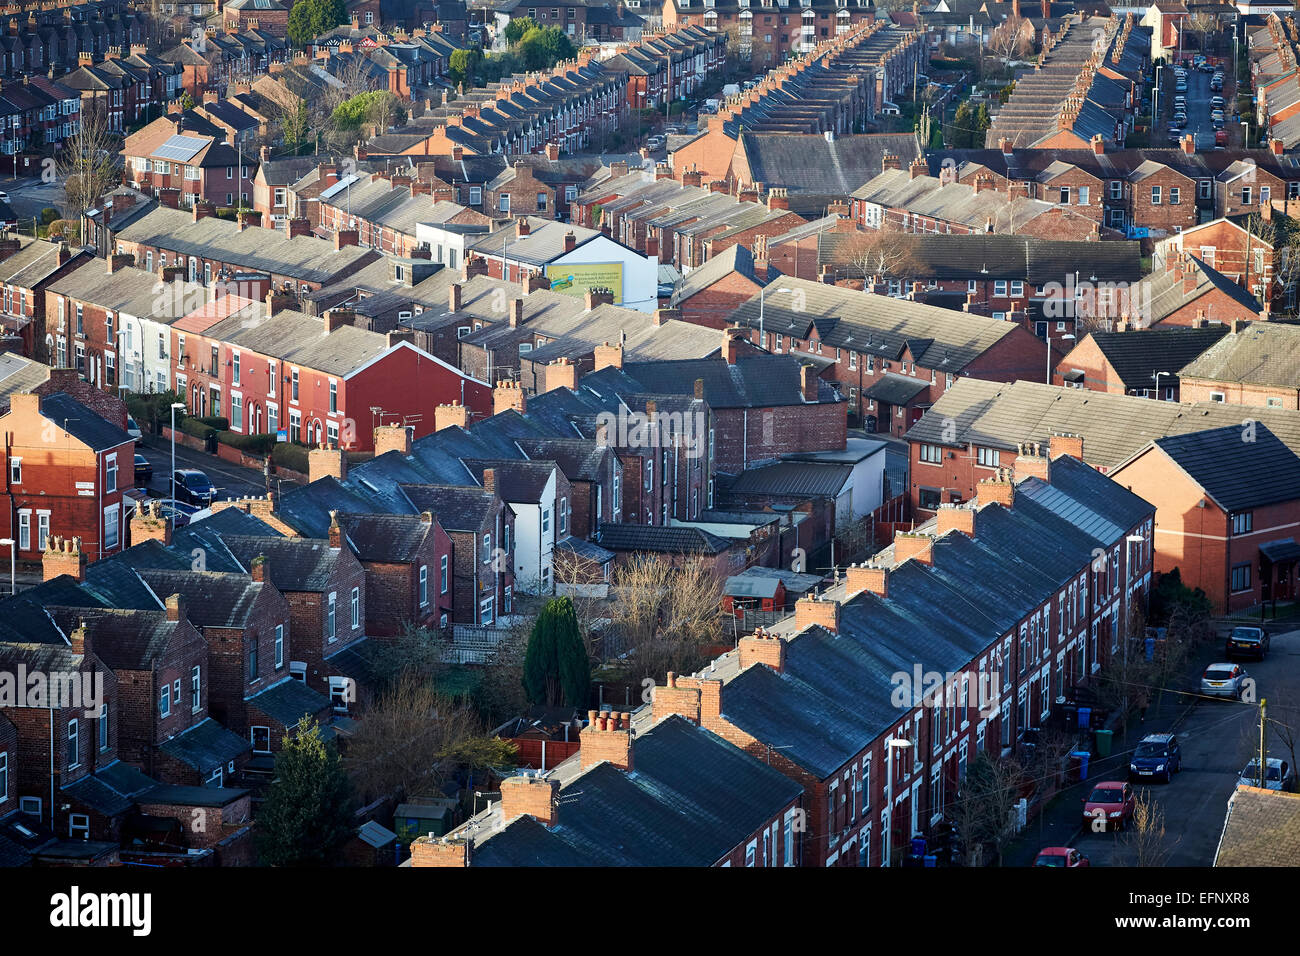 House Rooftops Uk High Resolution Stock Photography and Images - Alamy